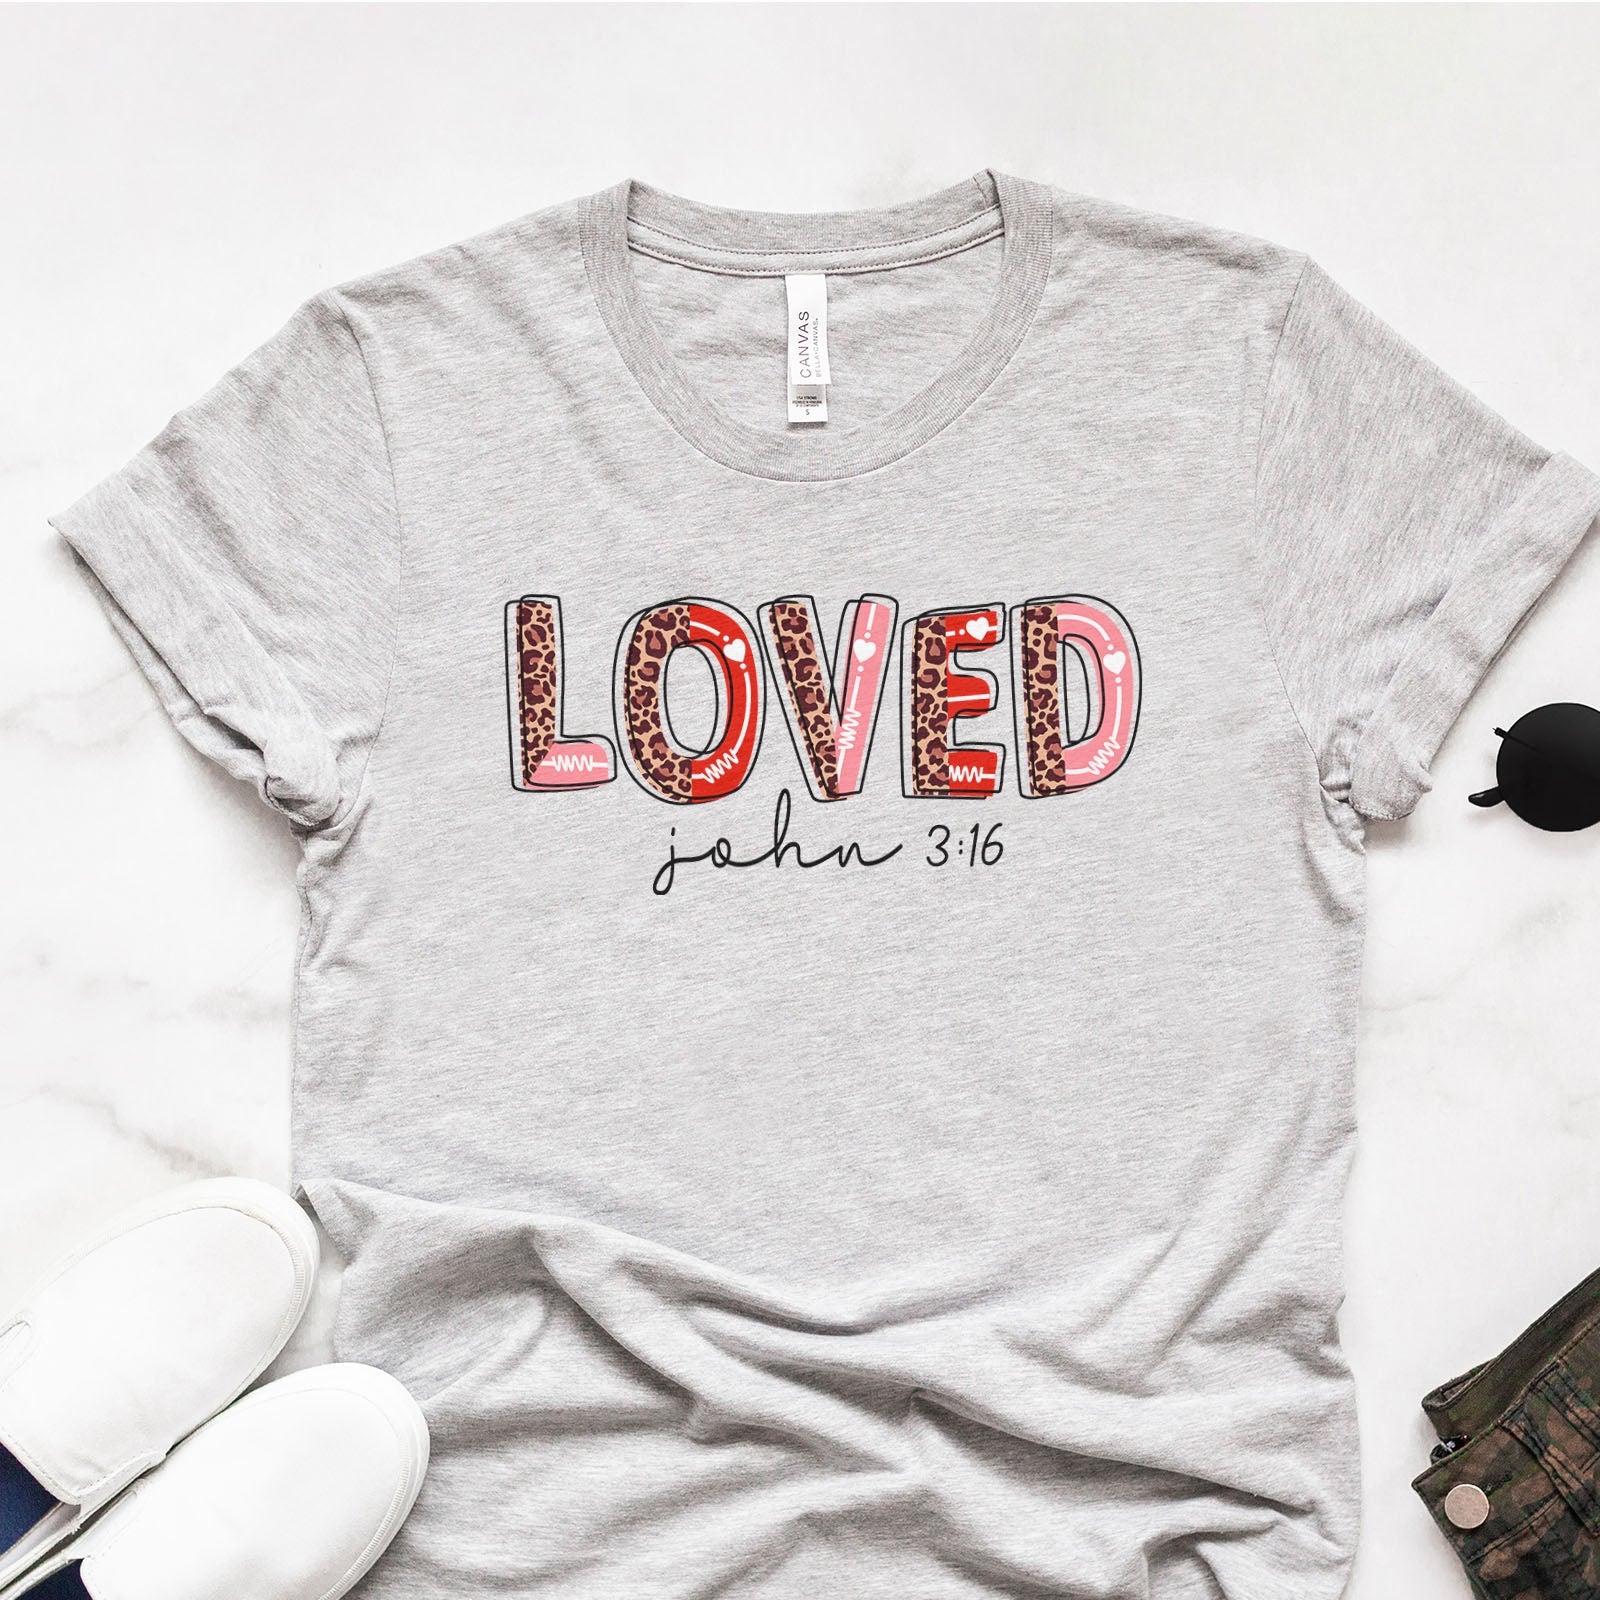 John 3:16 Loved Leopard Doodle Tee Shirts For Women - Christian Shirts for Women - Religious Tee Shirts